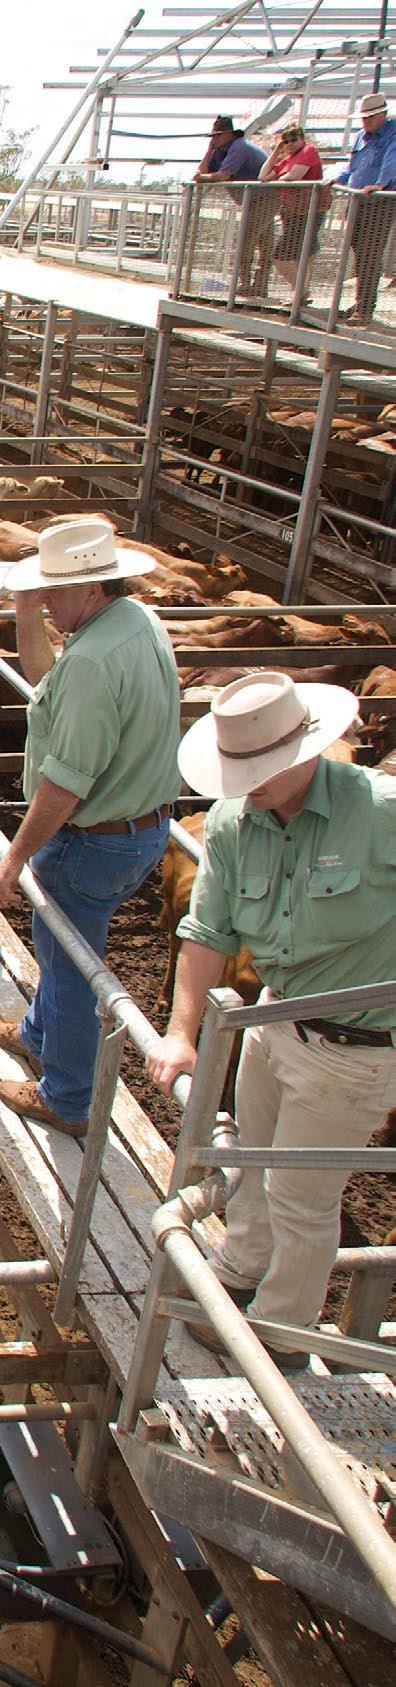 AT SALEYARDS AND DURING TRANSPORT As livestock leave the farm or the feedlot, their movement is governed by a number of programs and systems to ensure the integrity, traceability and welfare of the